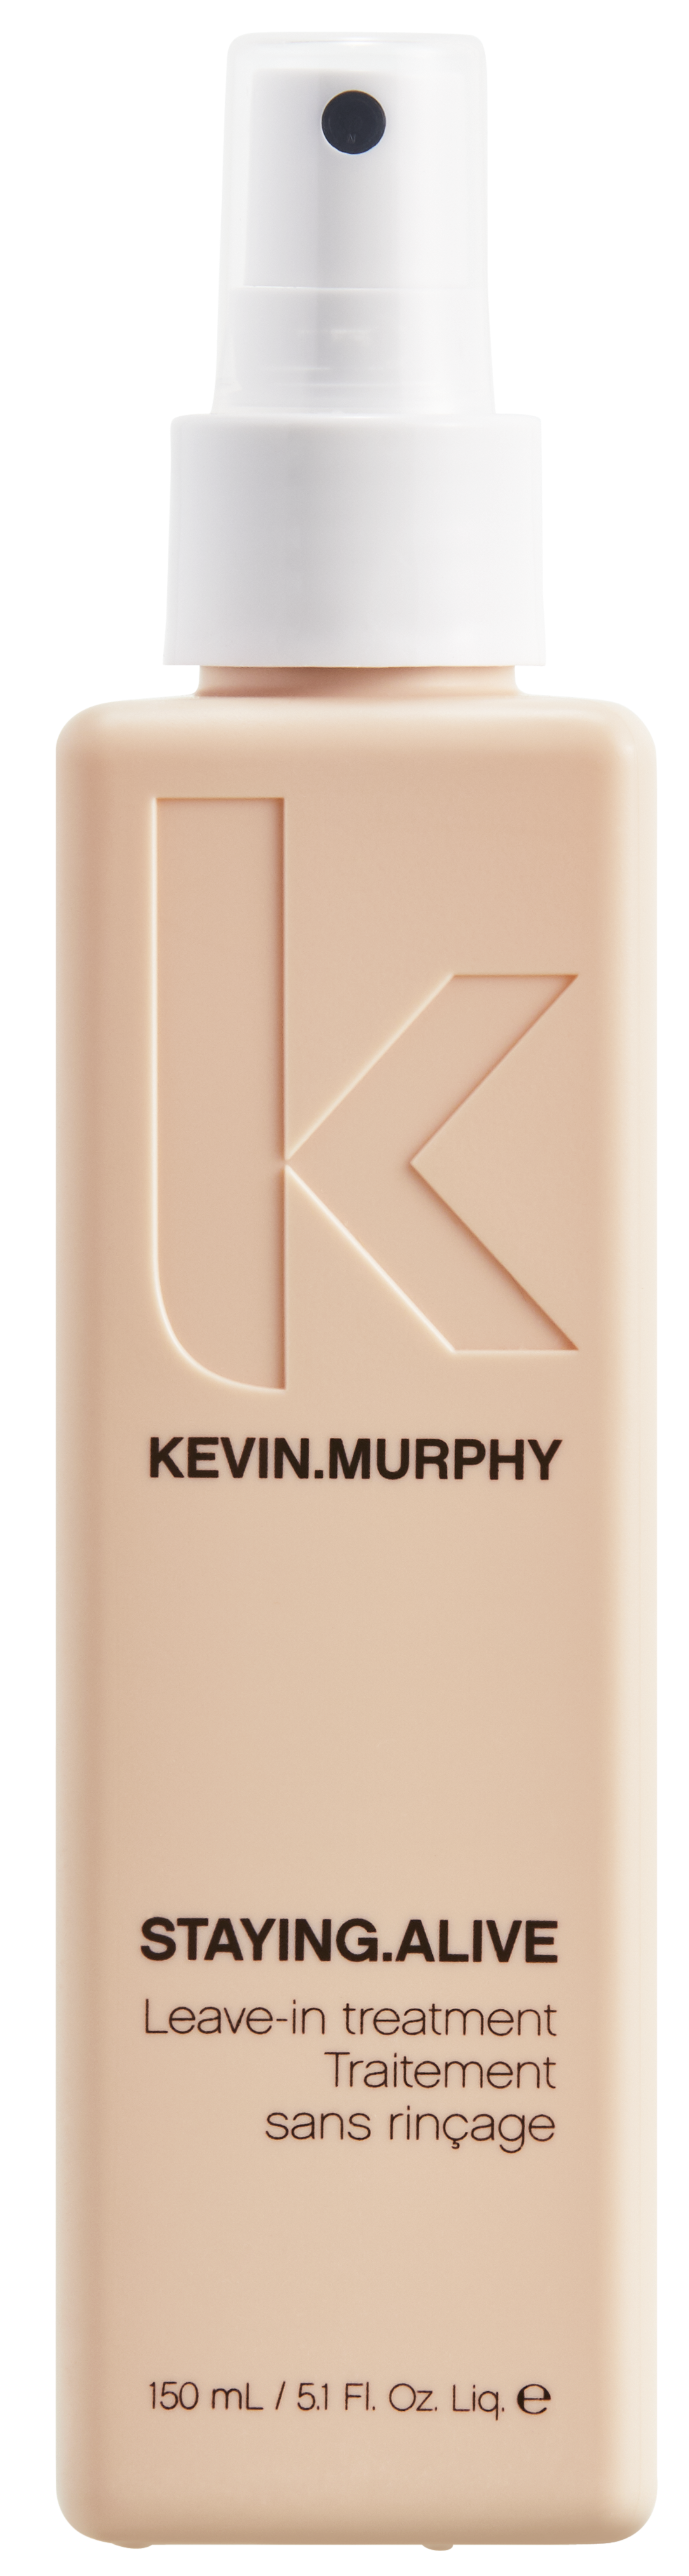 KEVIN.MURPHY STAYING.ALIVE